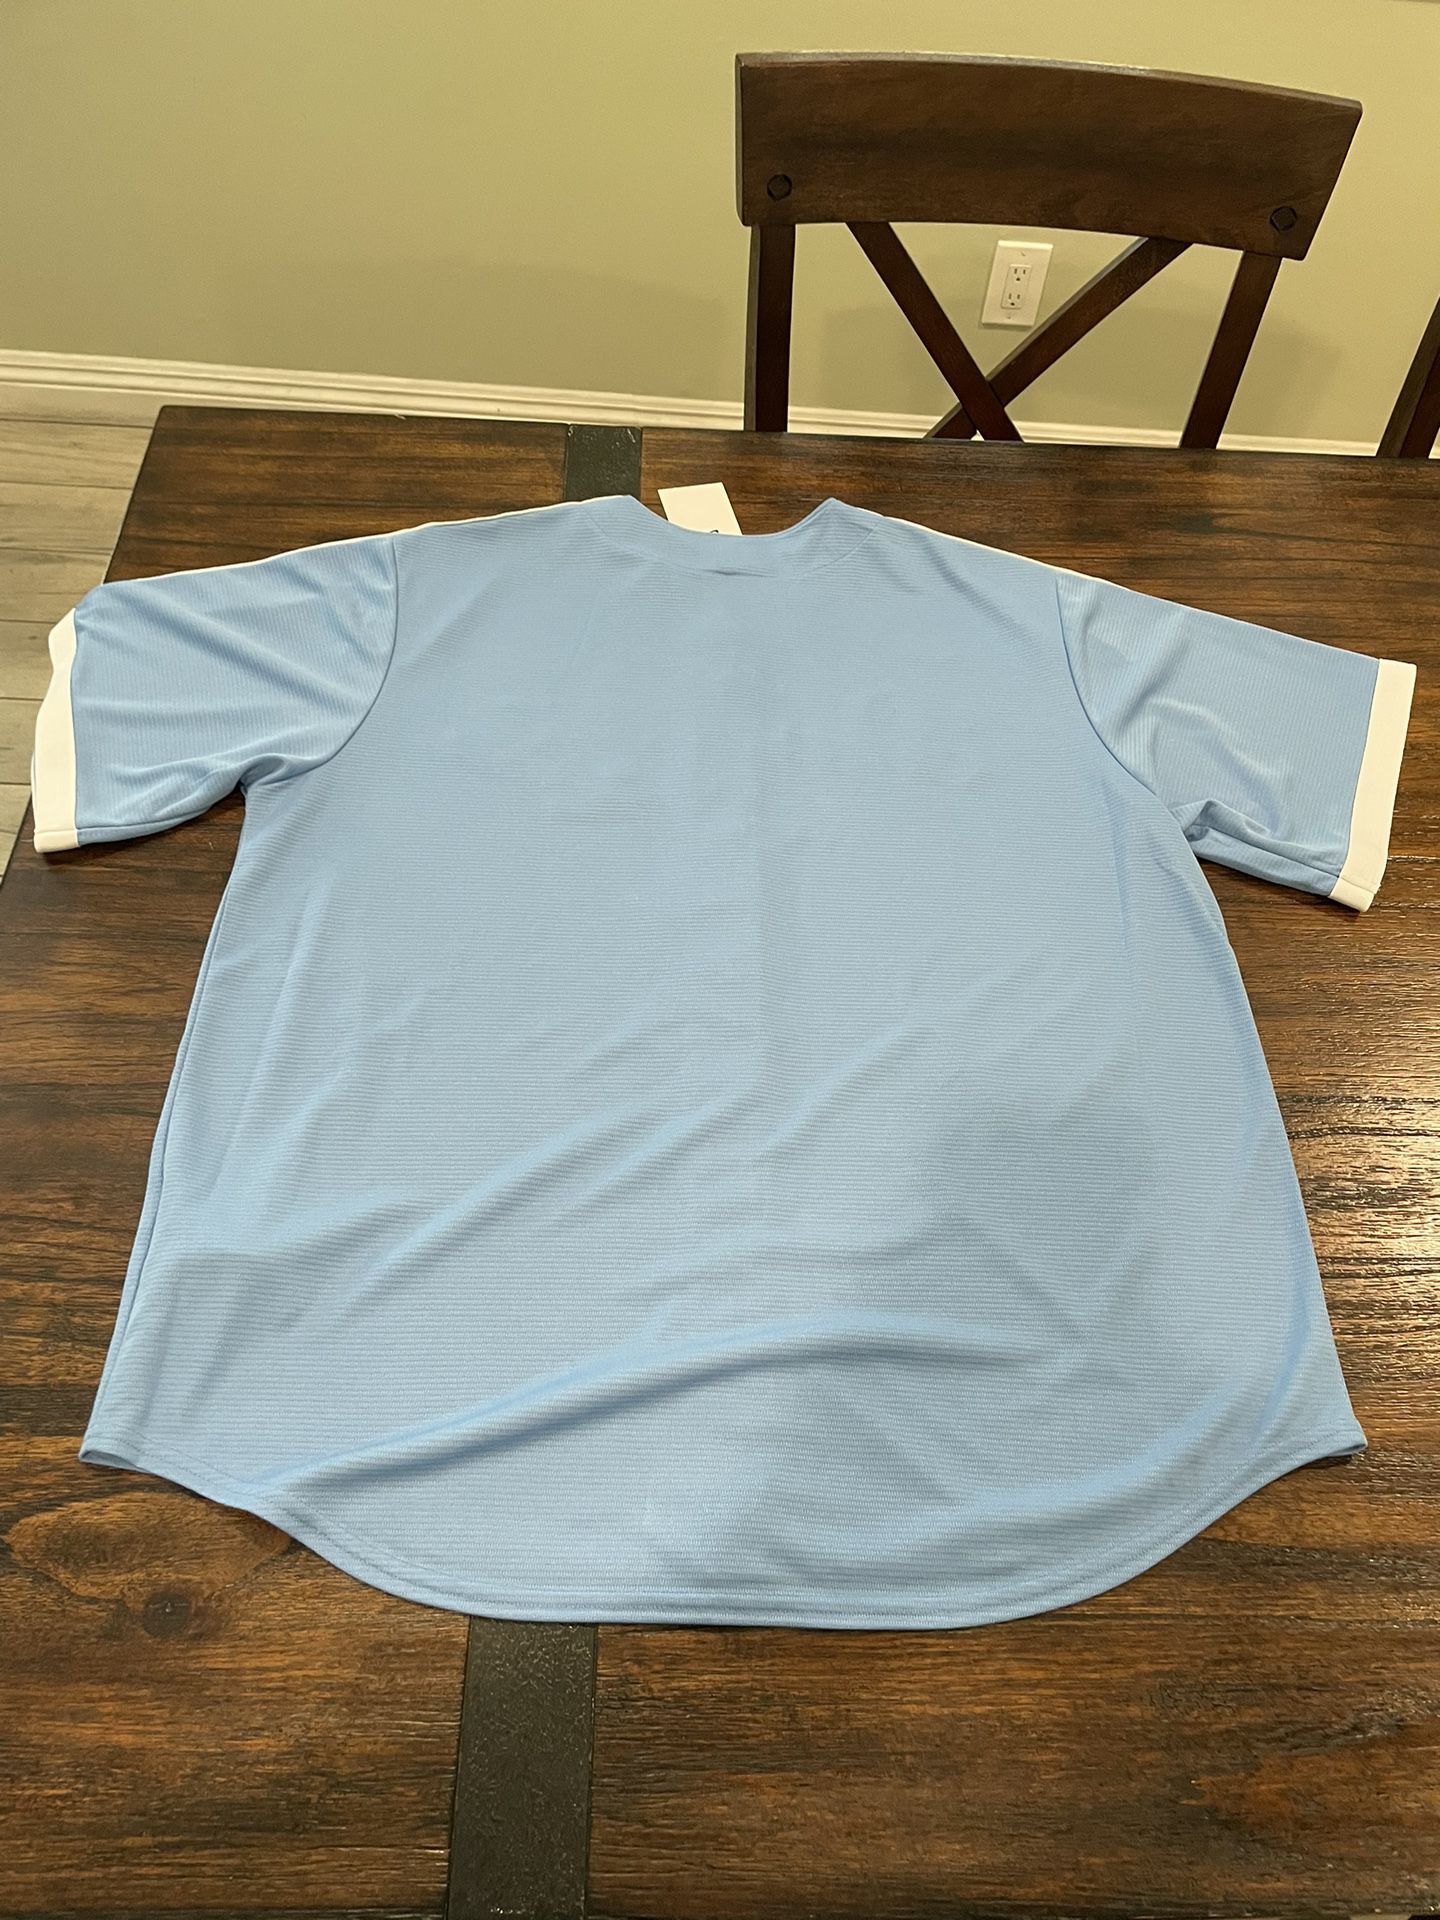 Nike Pro Combat LA Dodgers Baseball Blue Athletic Fitted Shirt Men 2XL  Dri-Fit for Sale in Ontario, CA - OfferUp